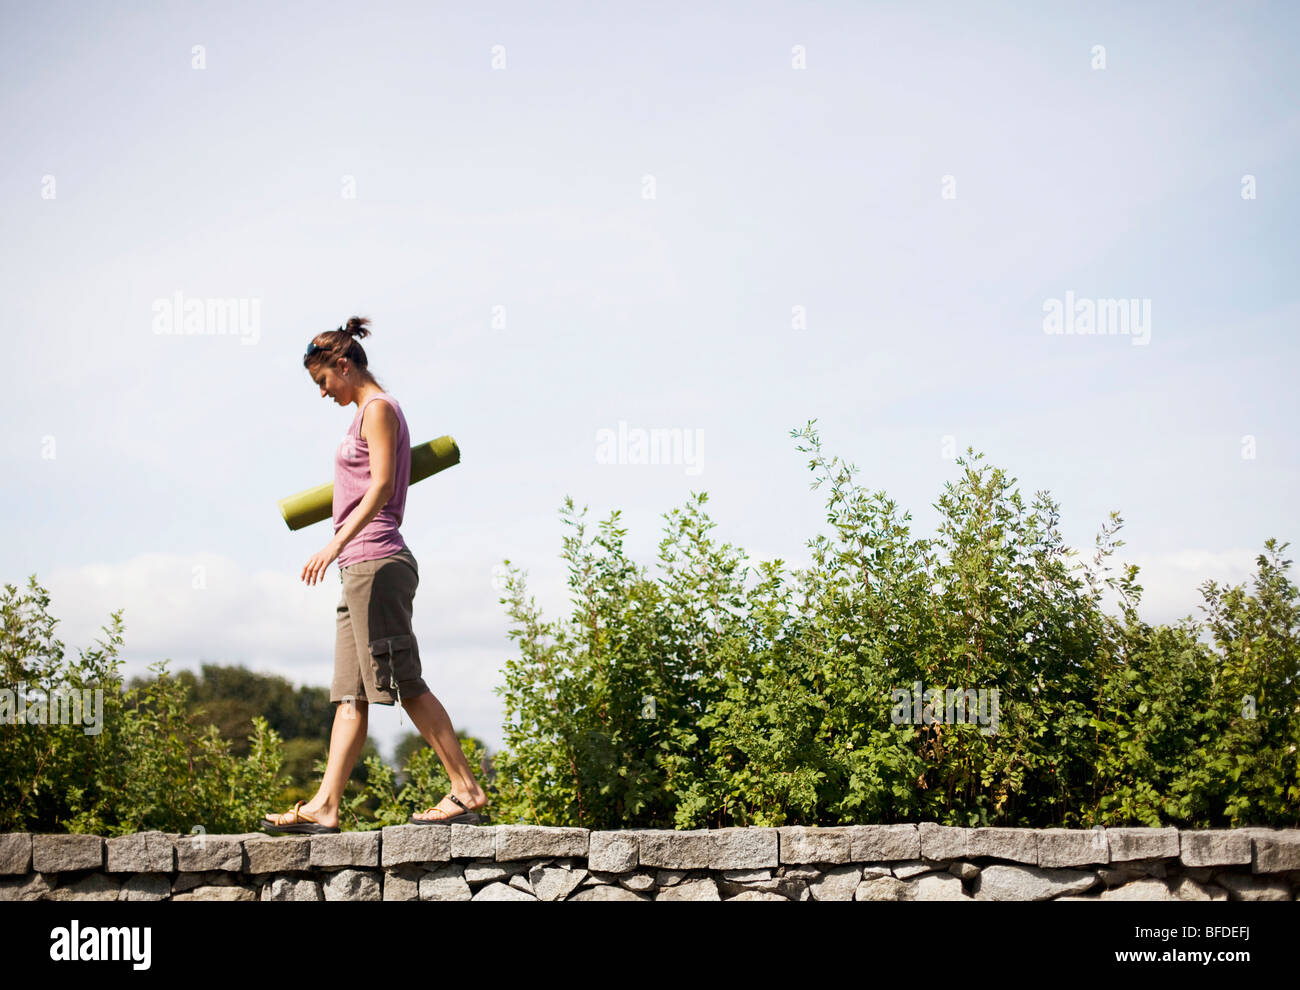 A young woman walks on a stone ledge holding a green yoga mat. Stock Photo